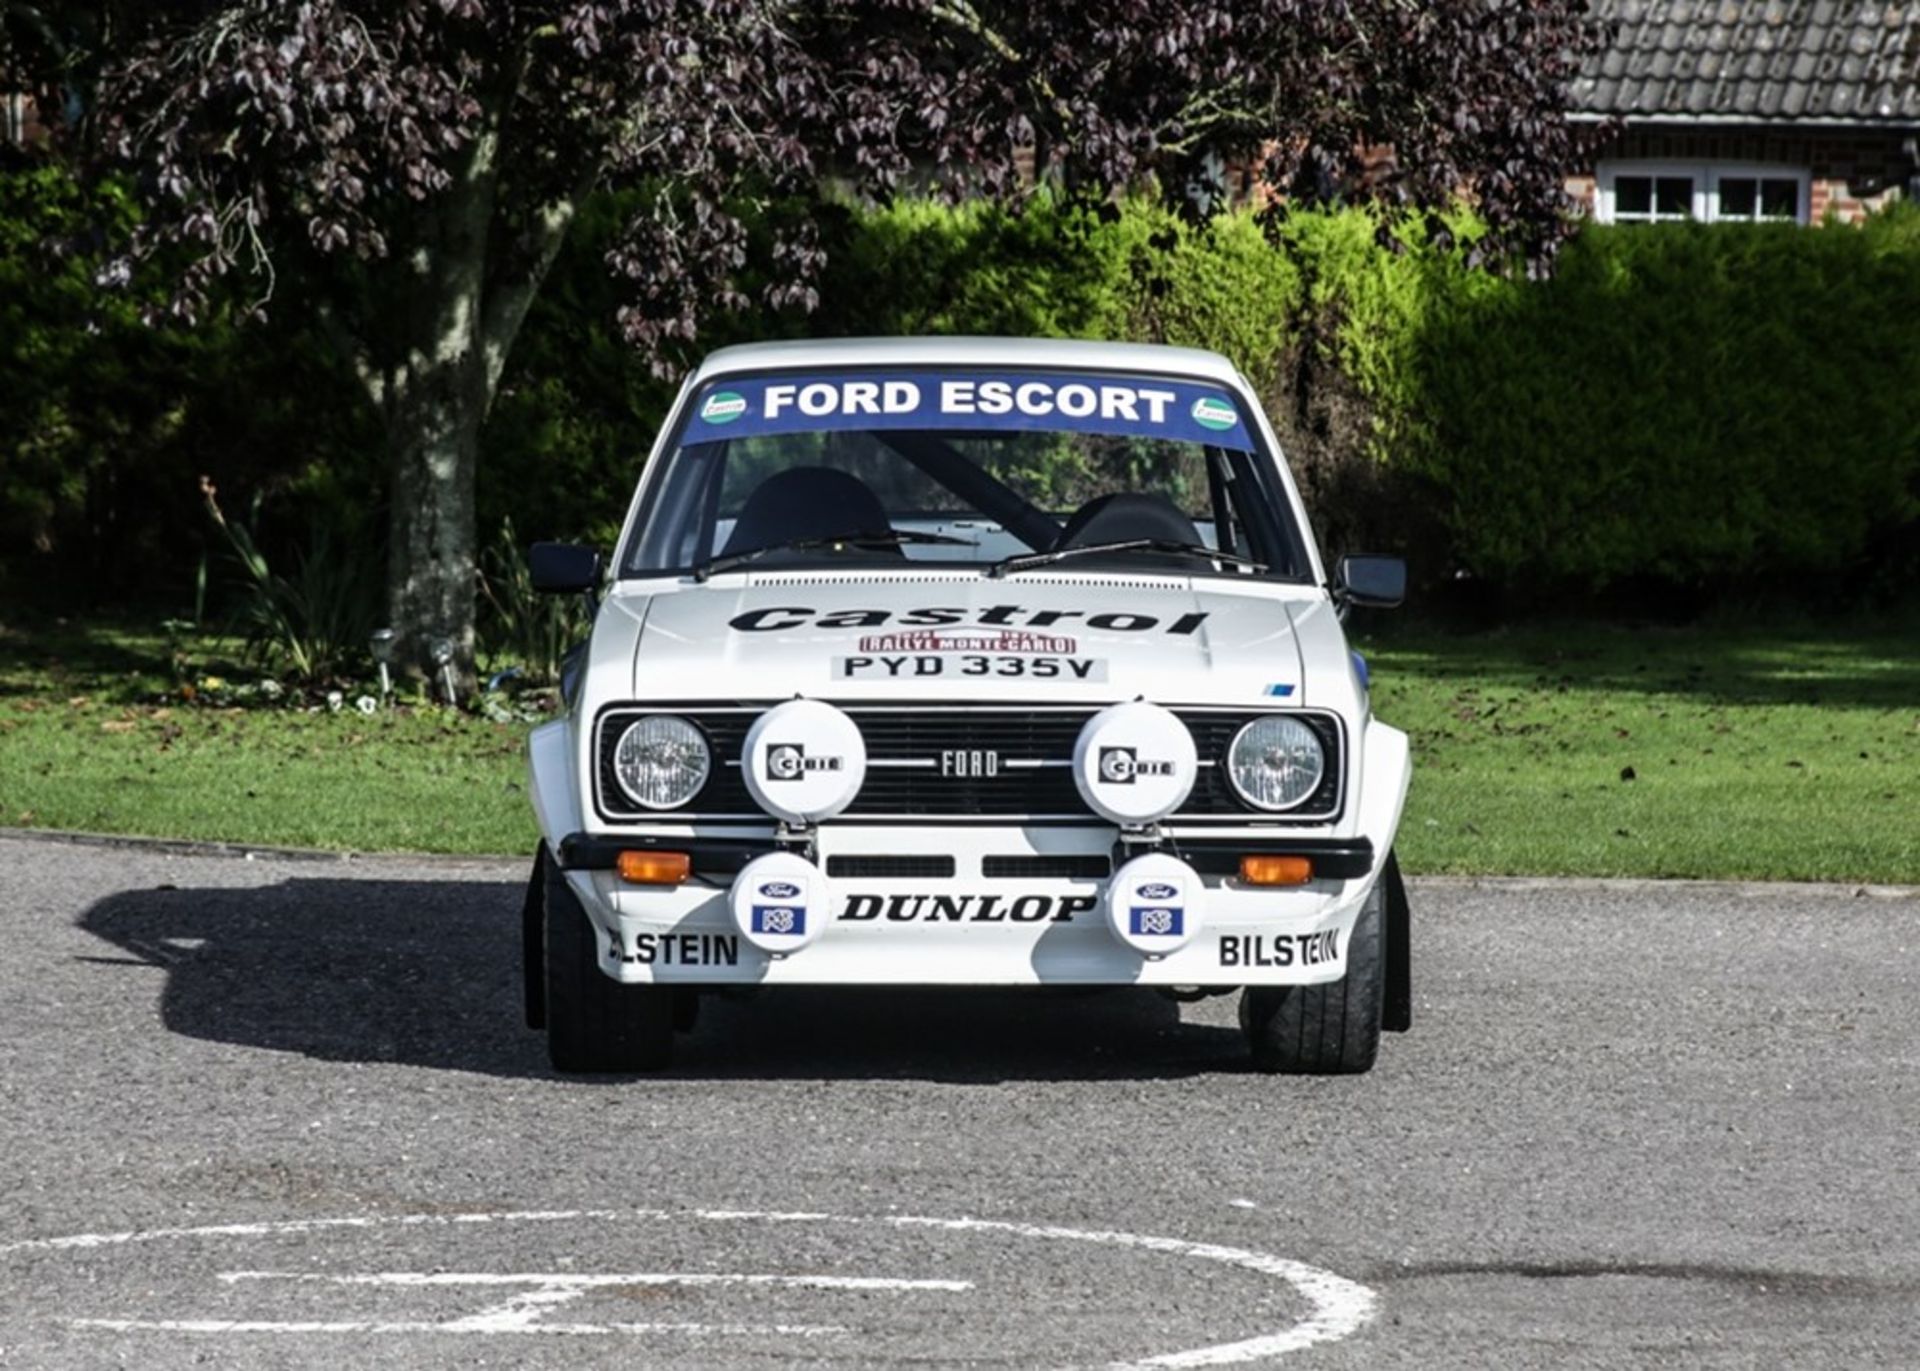 1980 Ford Escort Mk. II Rally Spec (1.7 litre) - Image 4 of 9